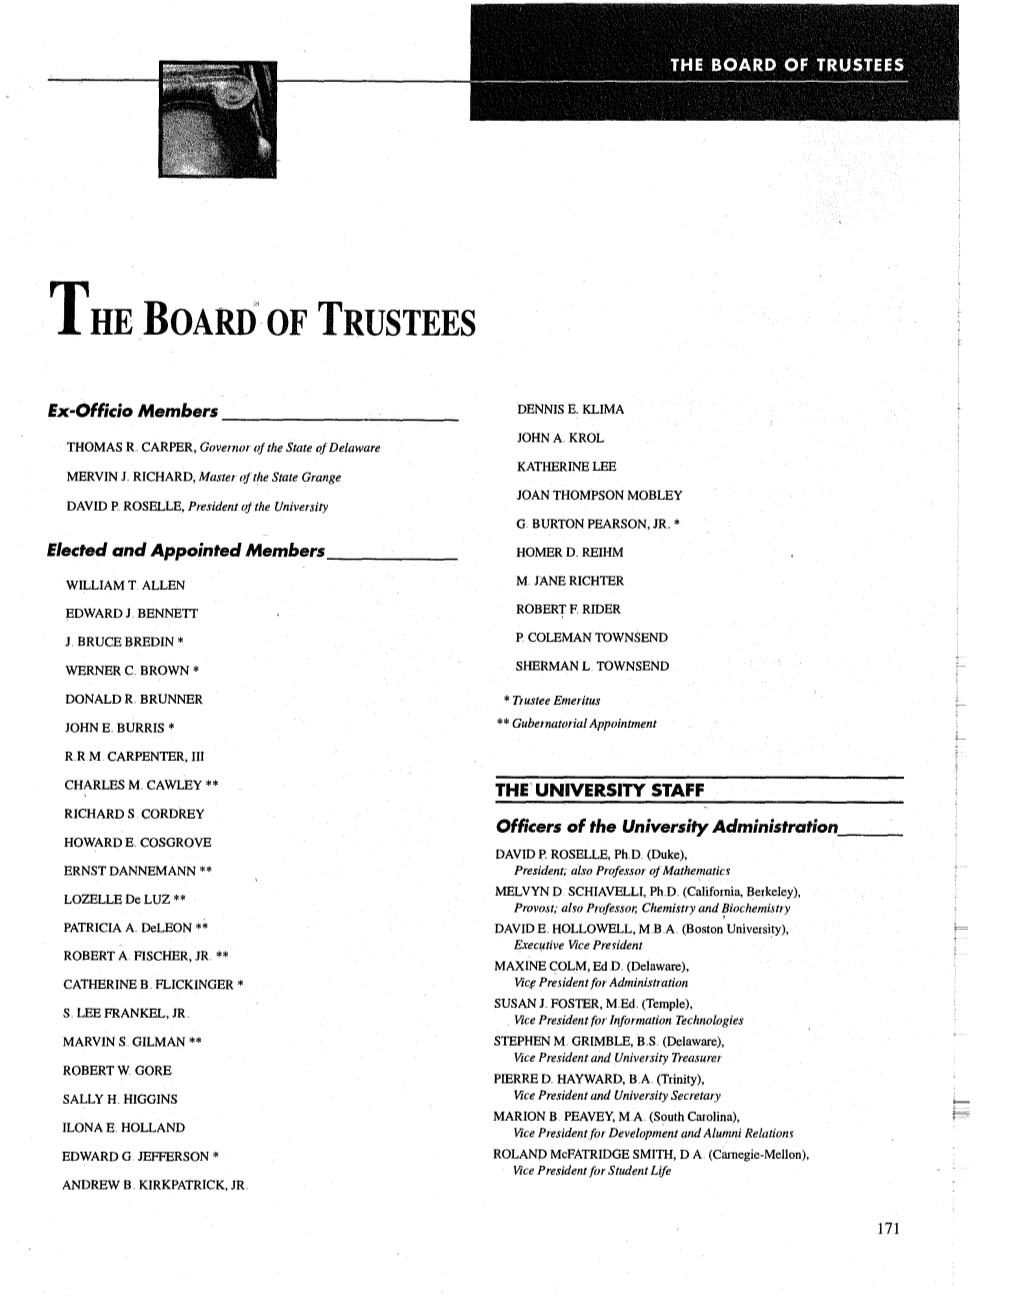 The Board of Trustees